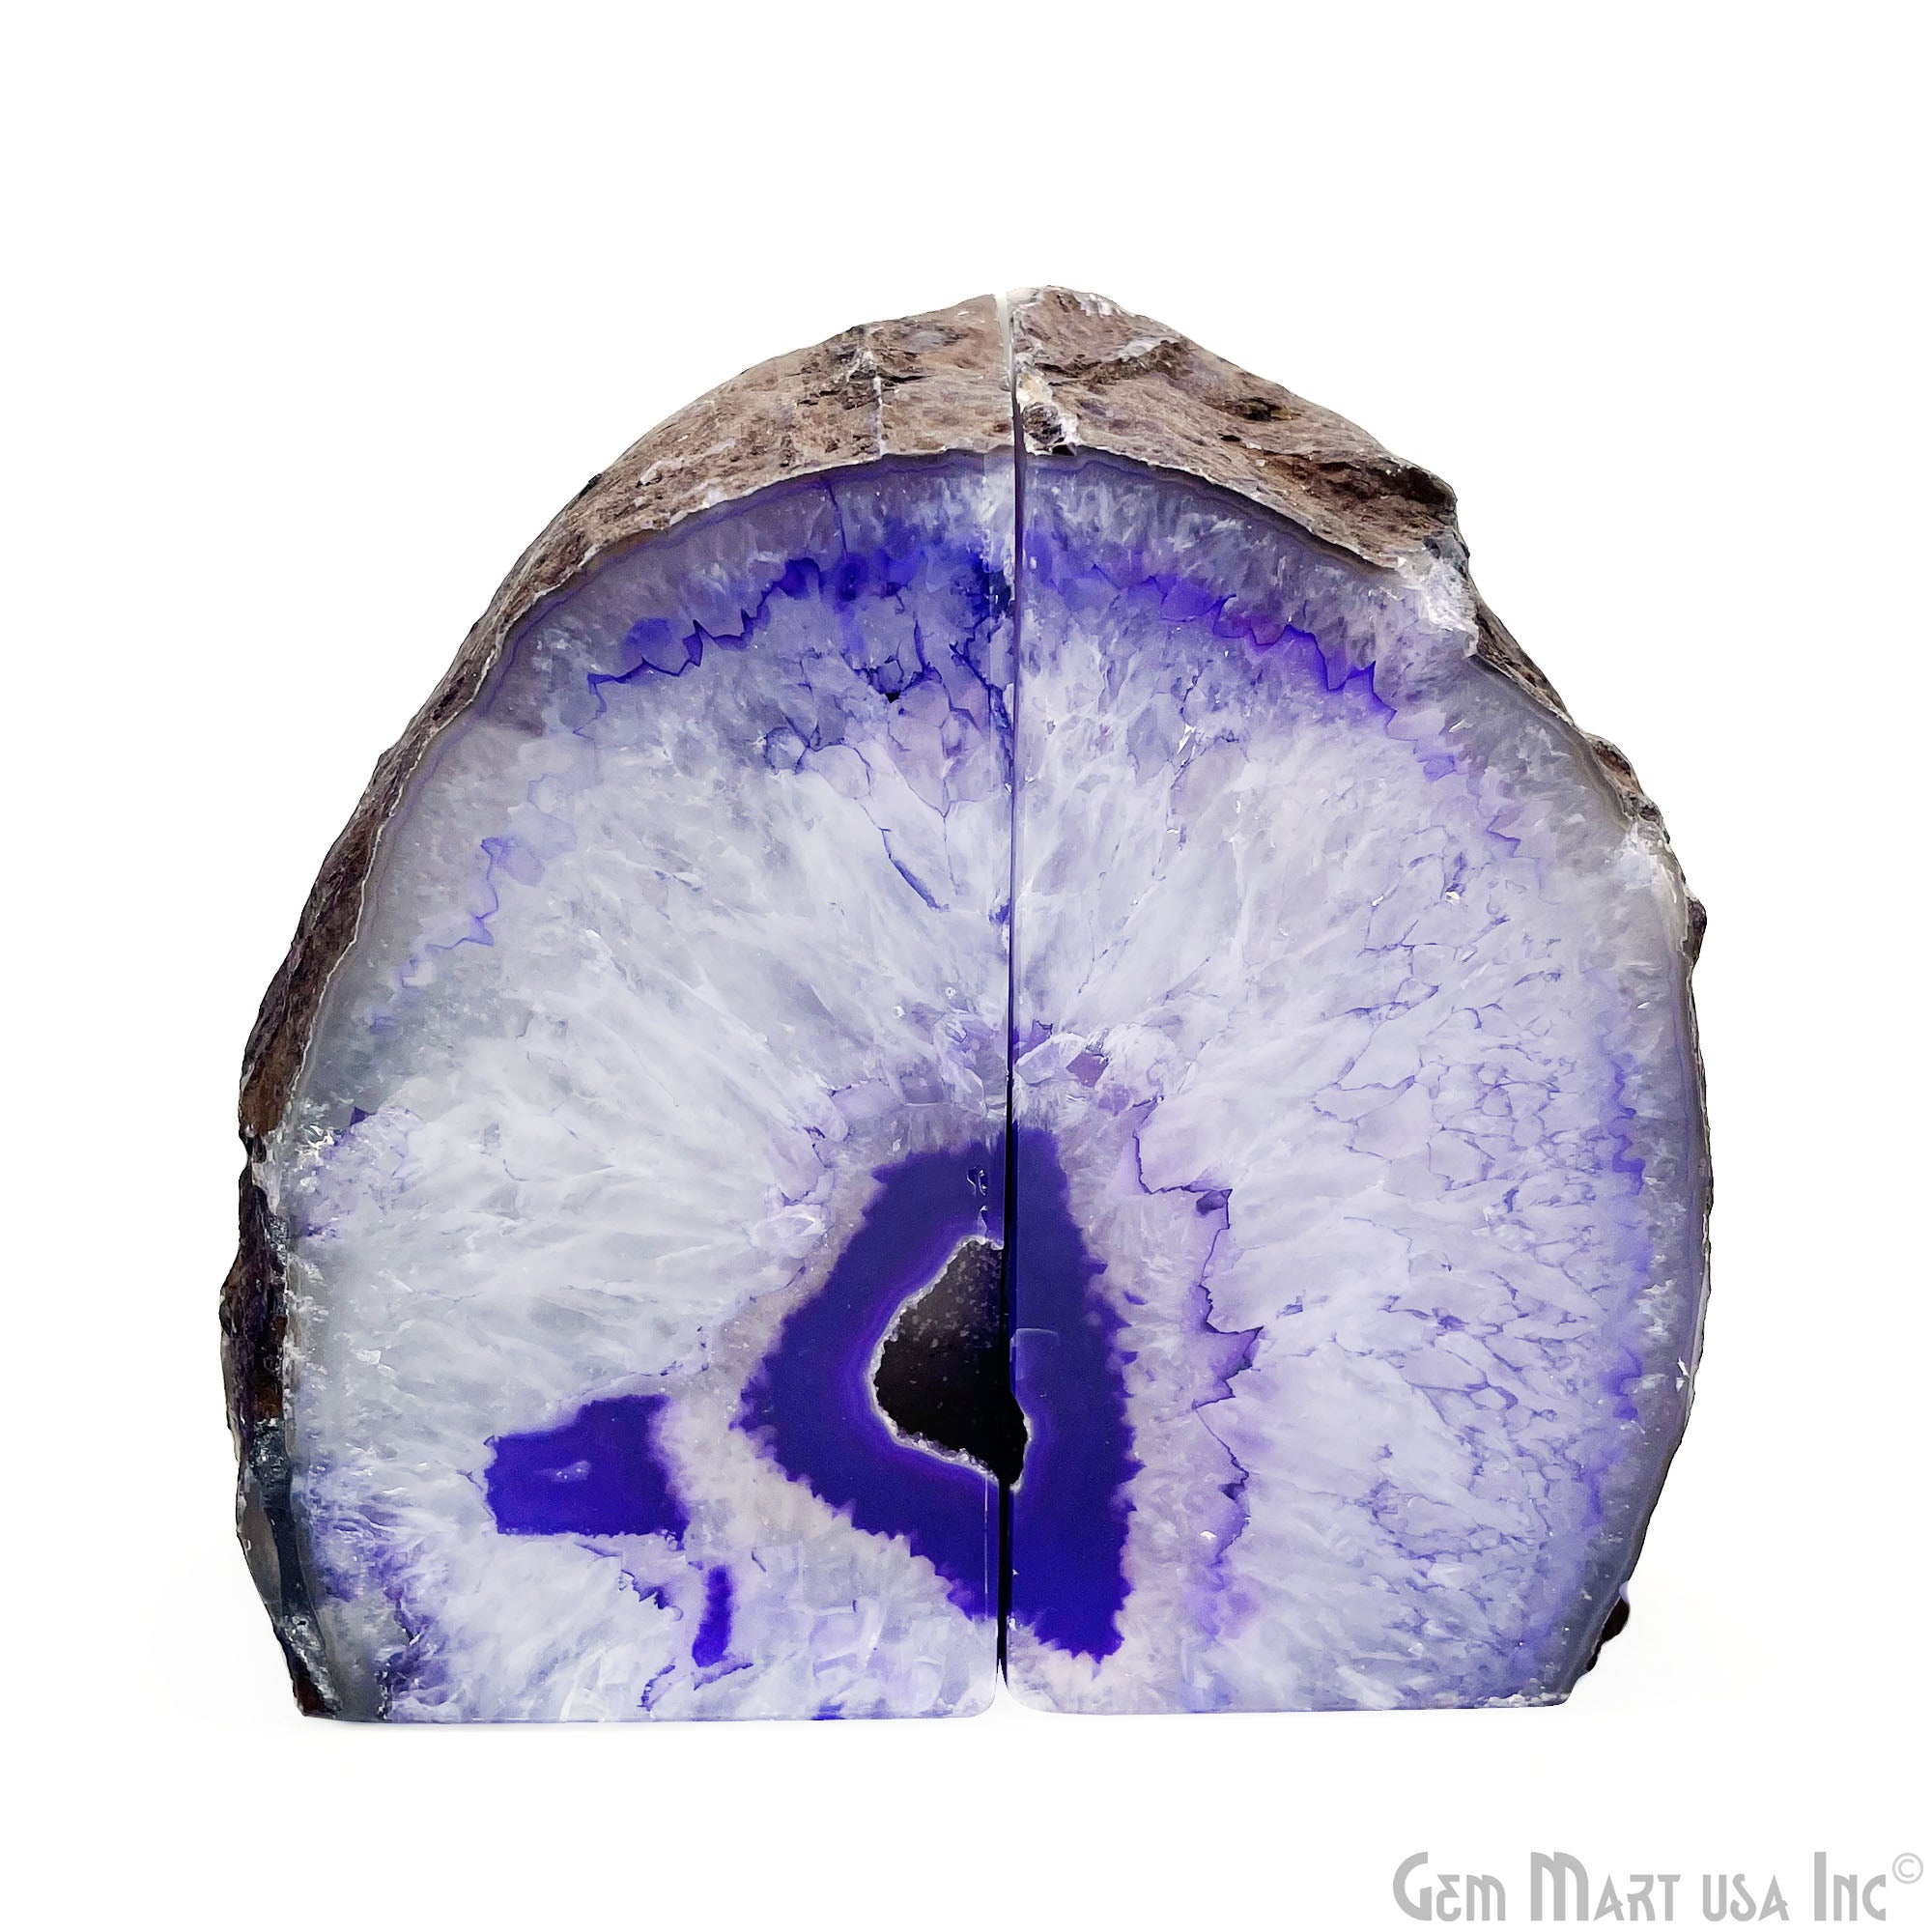 Large Geode Bookend. Purple Agate Bookend Pair. (4.31lbs, 5-6inch). Mineral Rock Formation, Healing Energy Crystal, Home Decor. *Ships Free